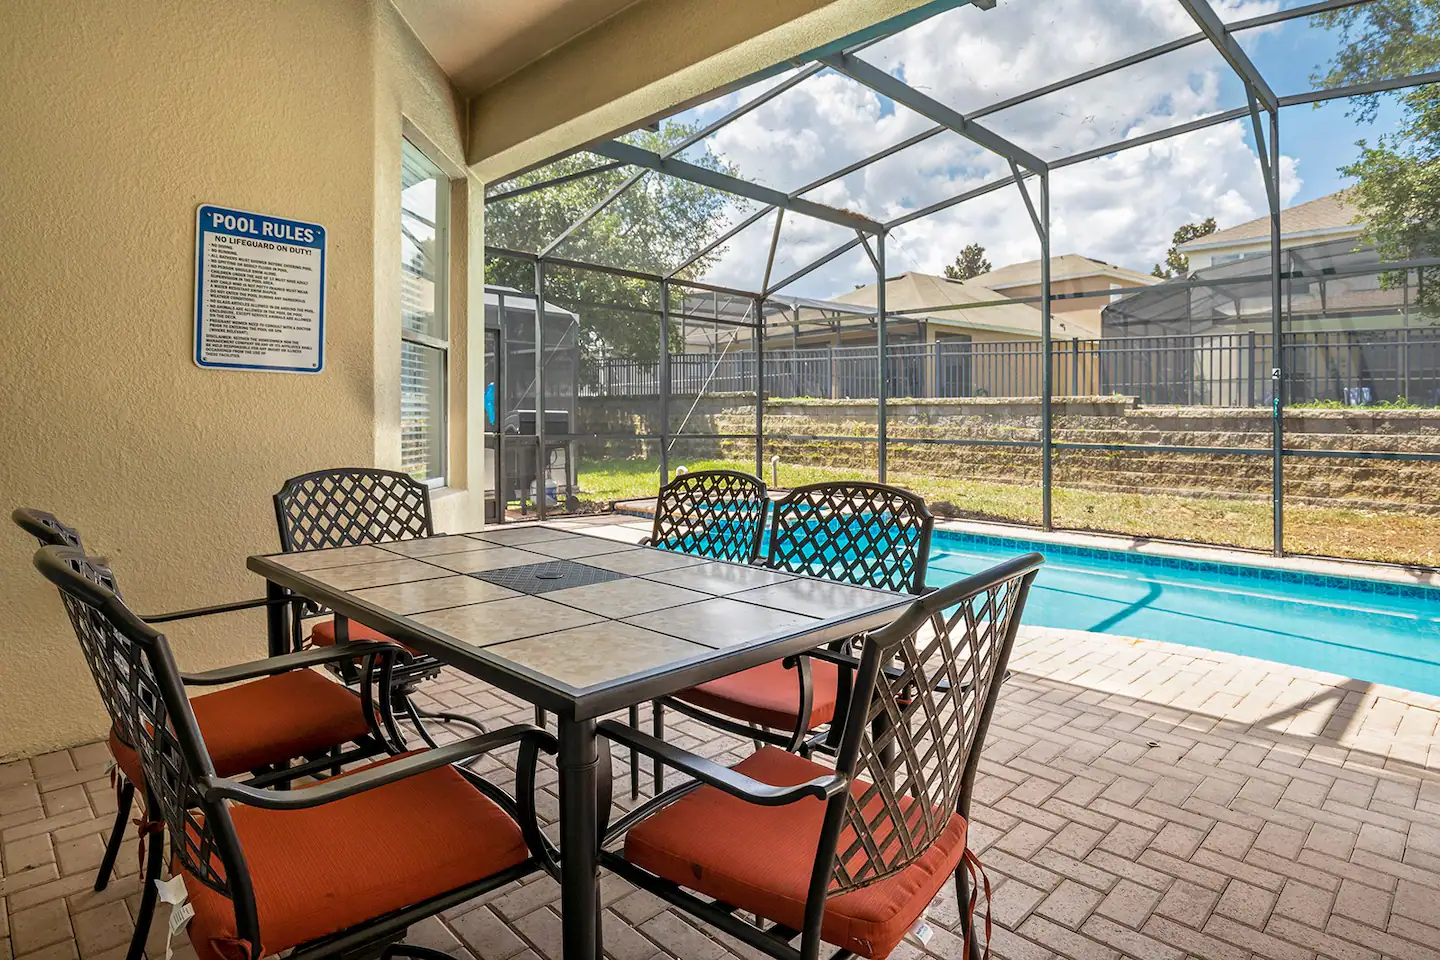 There is plenty of outdoor furniture surrounding the pool, providing a comfortable place for individuals who want to enjoy the sunshine in Florida.